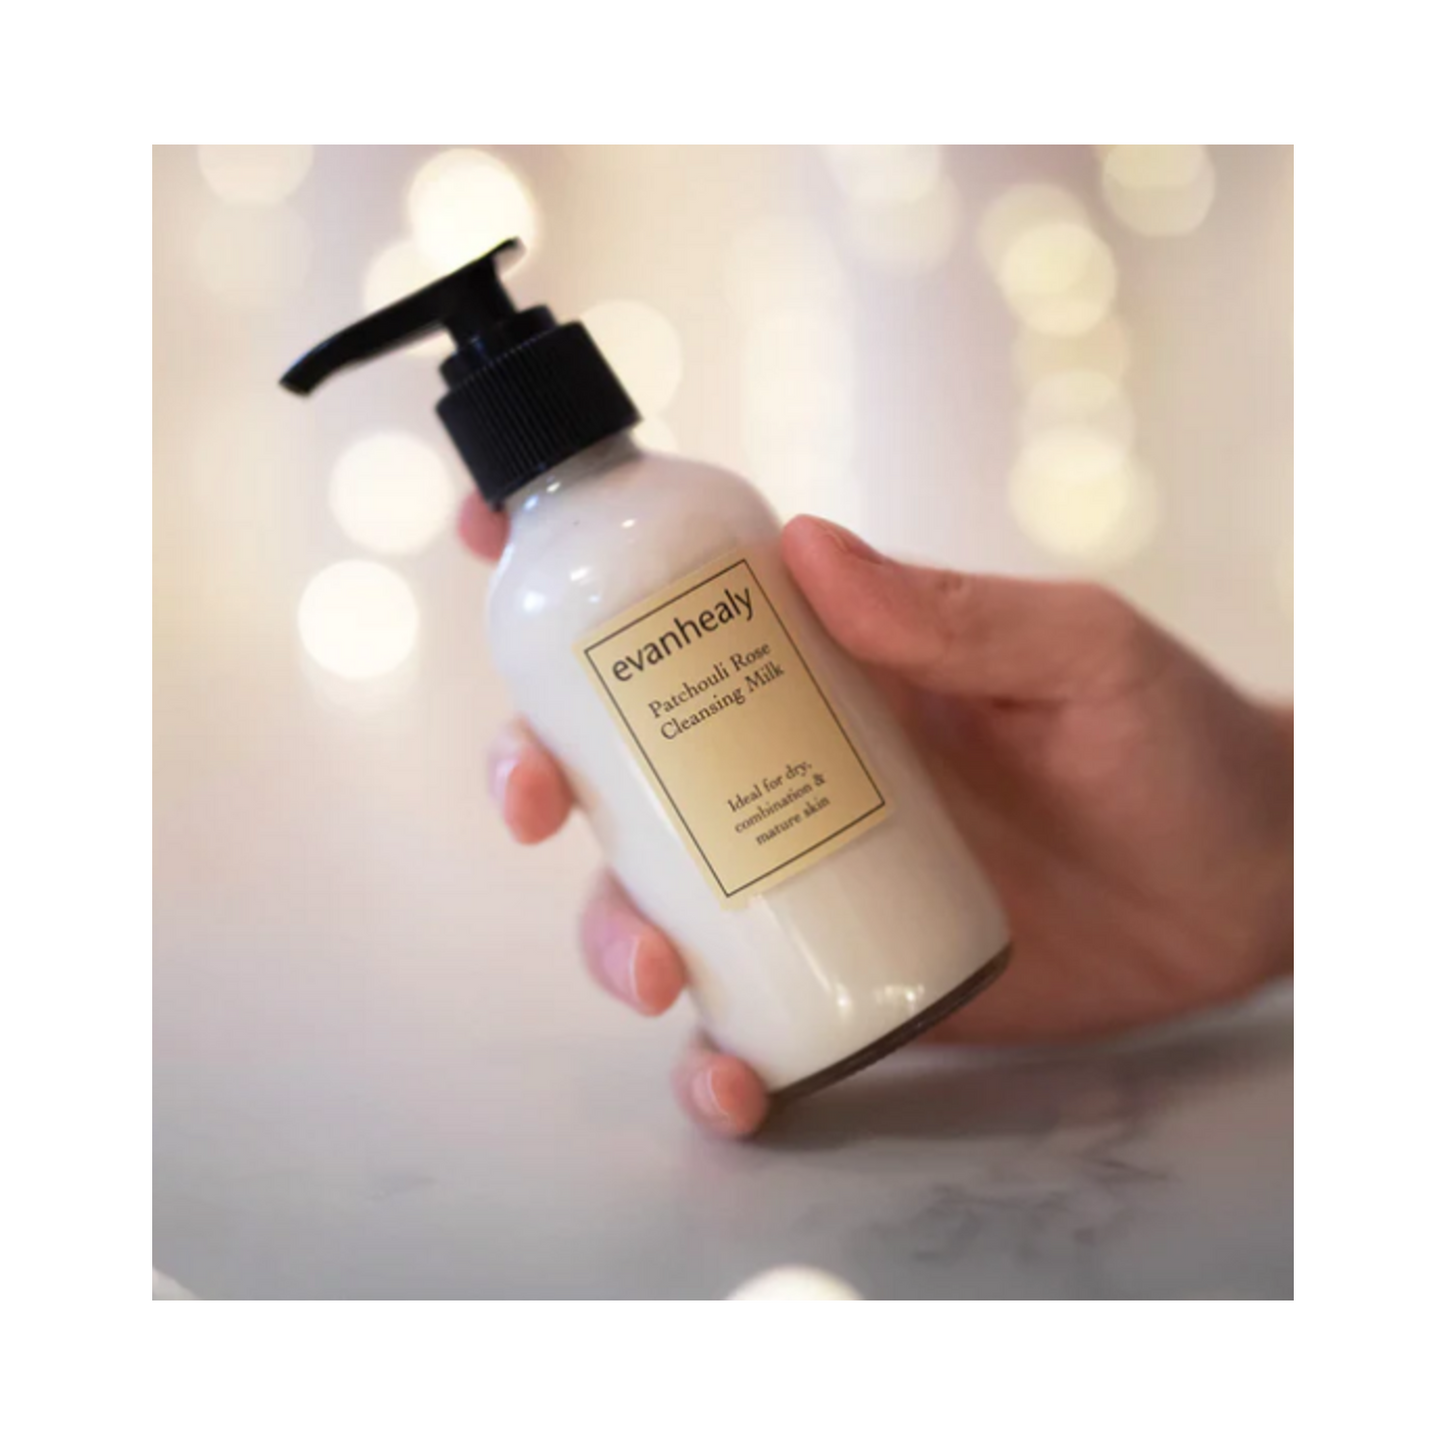 Evanhealy Patchouli Rose Cleansing Milk